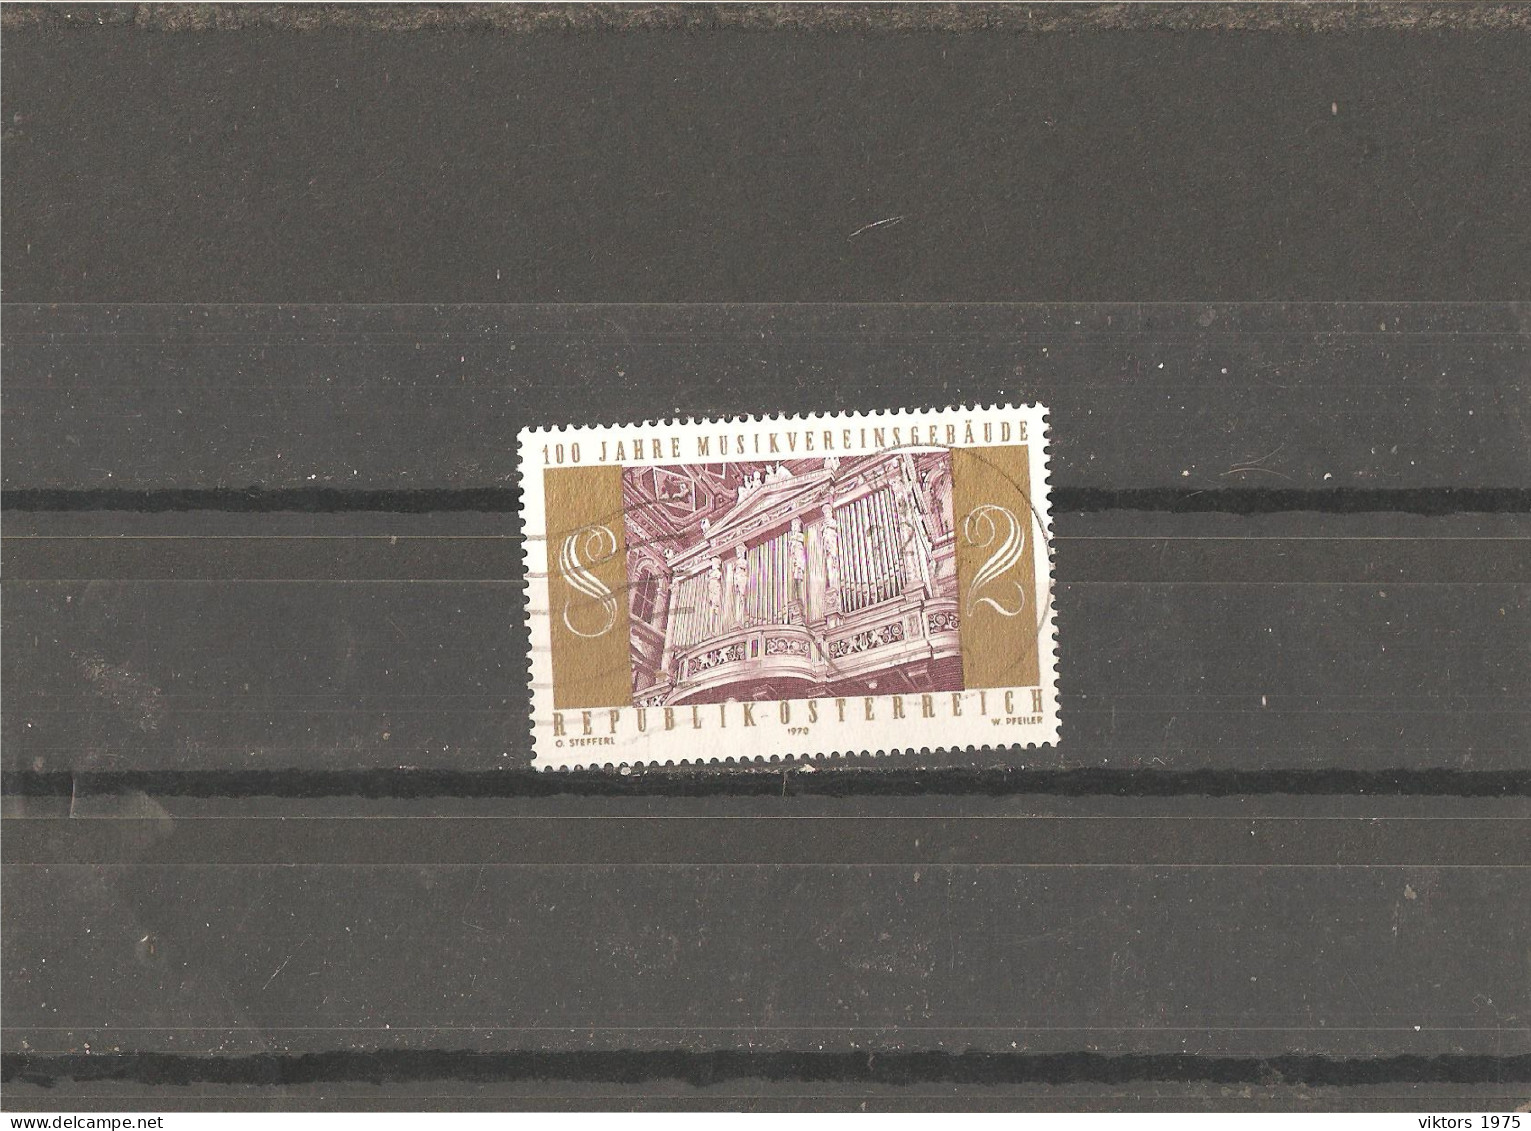 Used Stamp Nr.1327 In MICHEL Catalog - Used Stamps